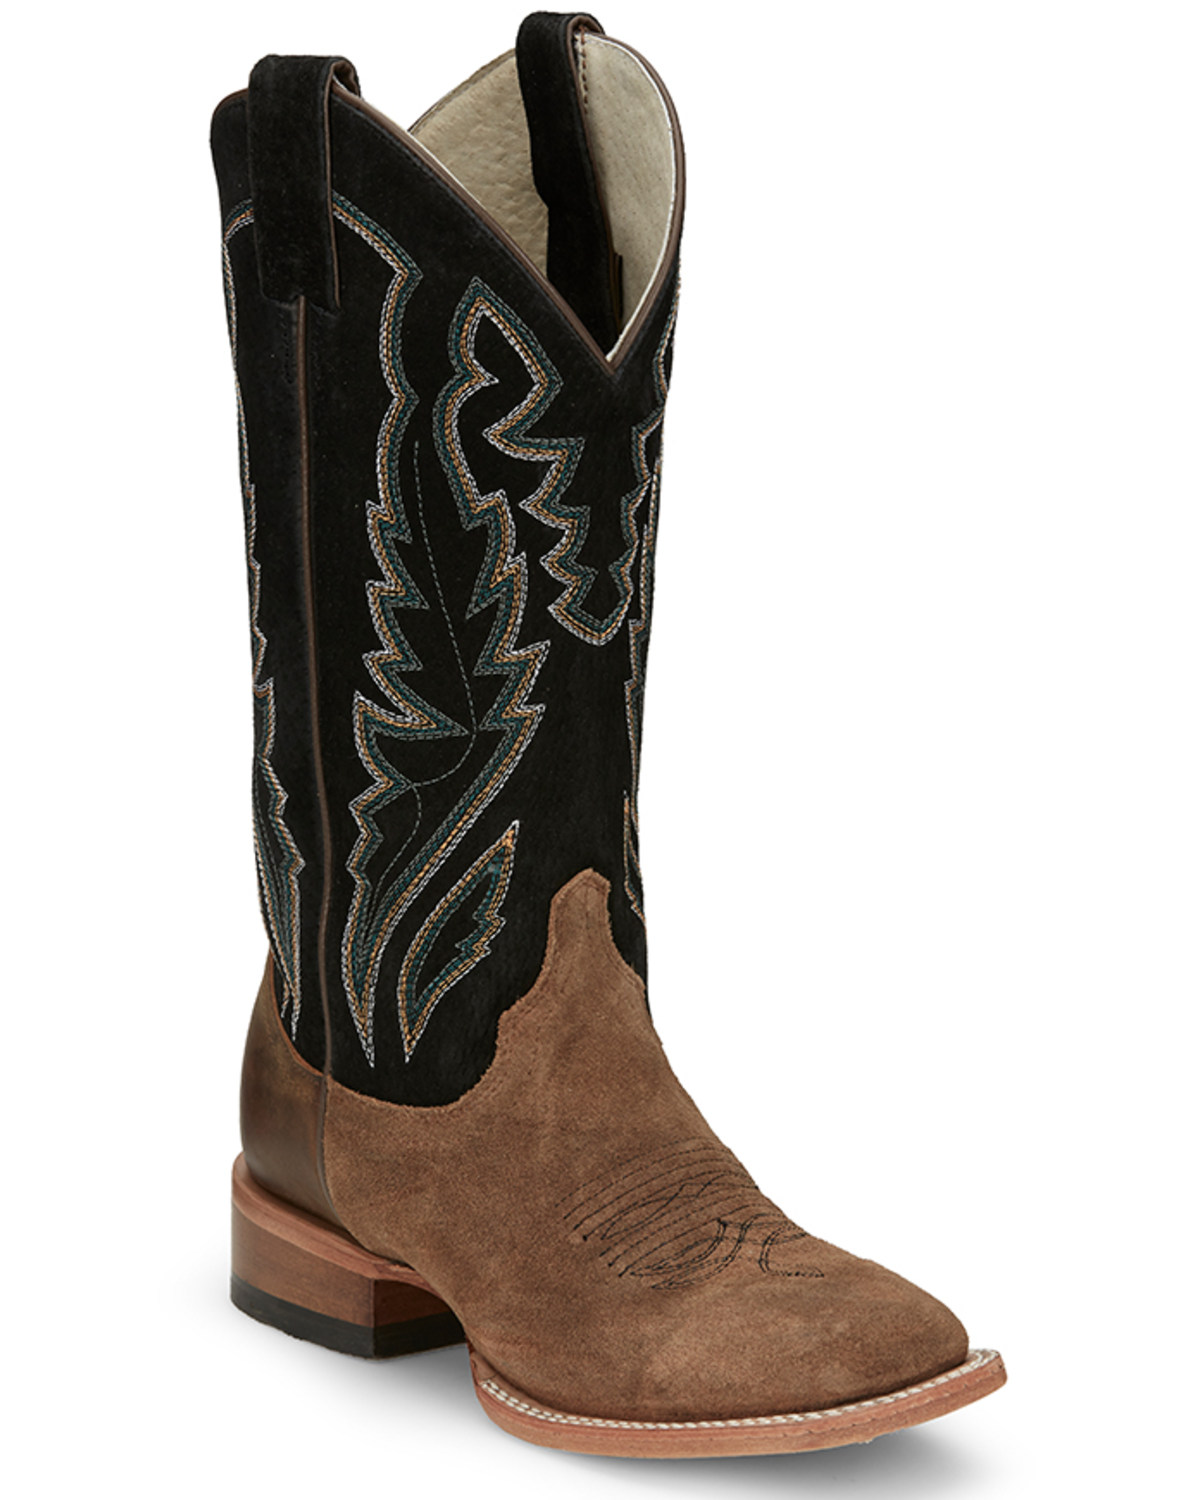 Justin Women's Palisade Western Boots - Broad Square Toe